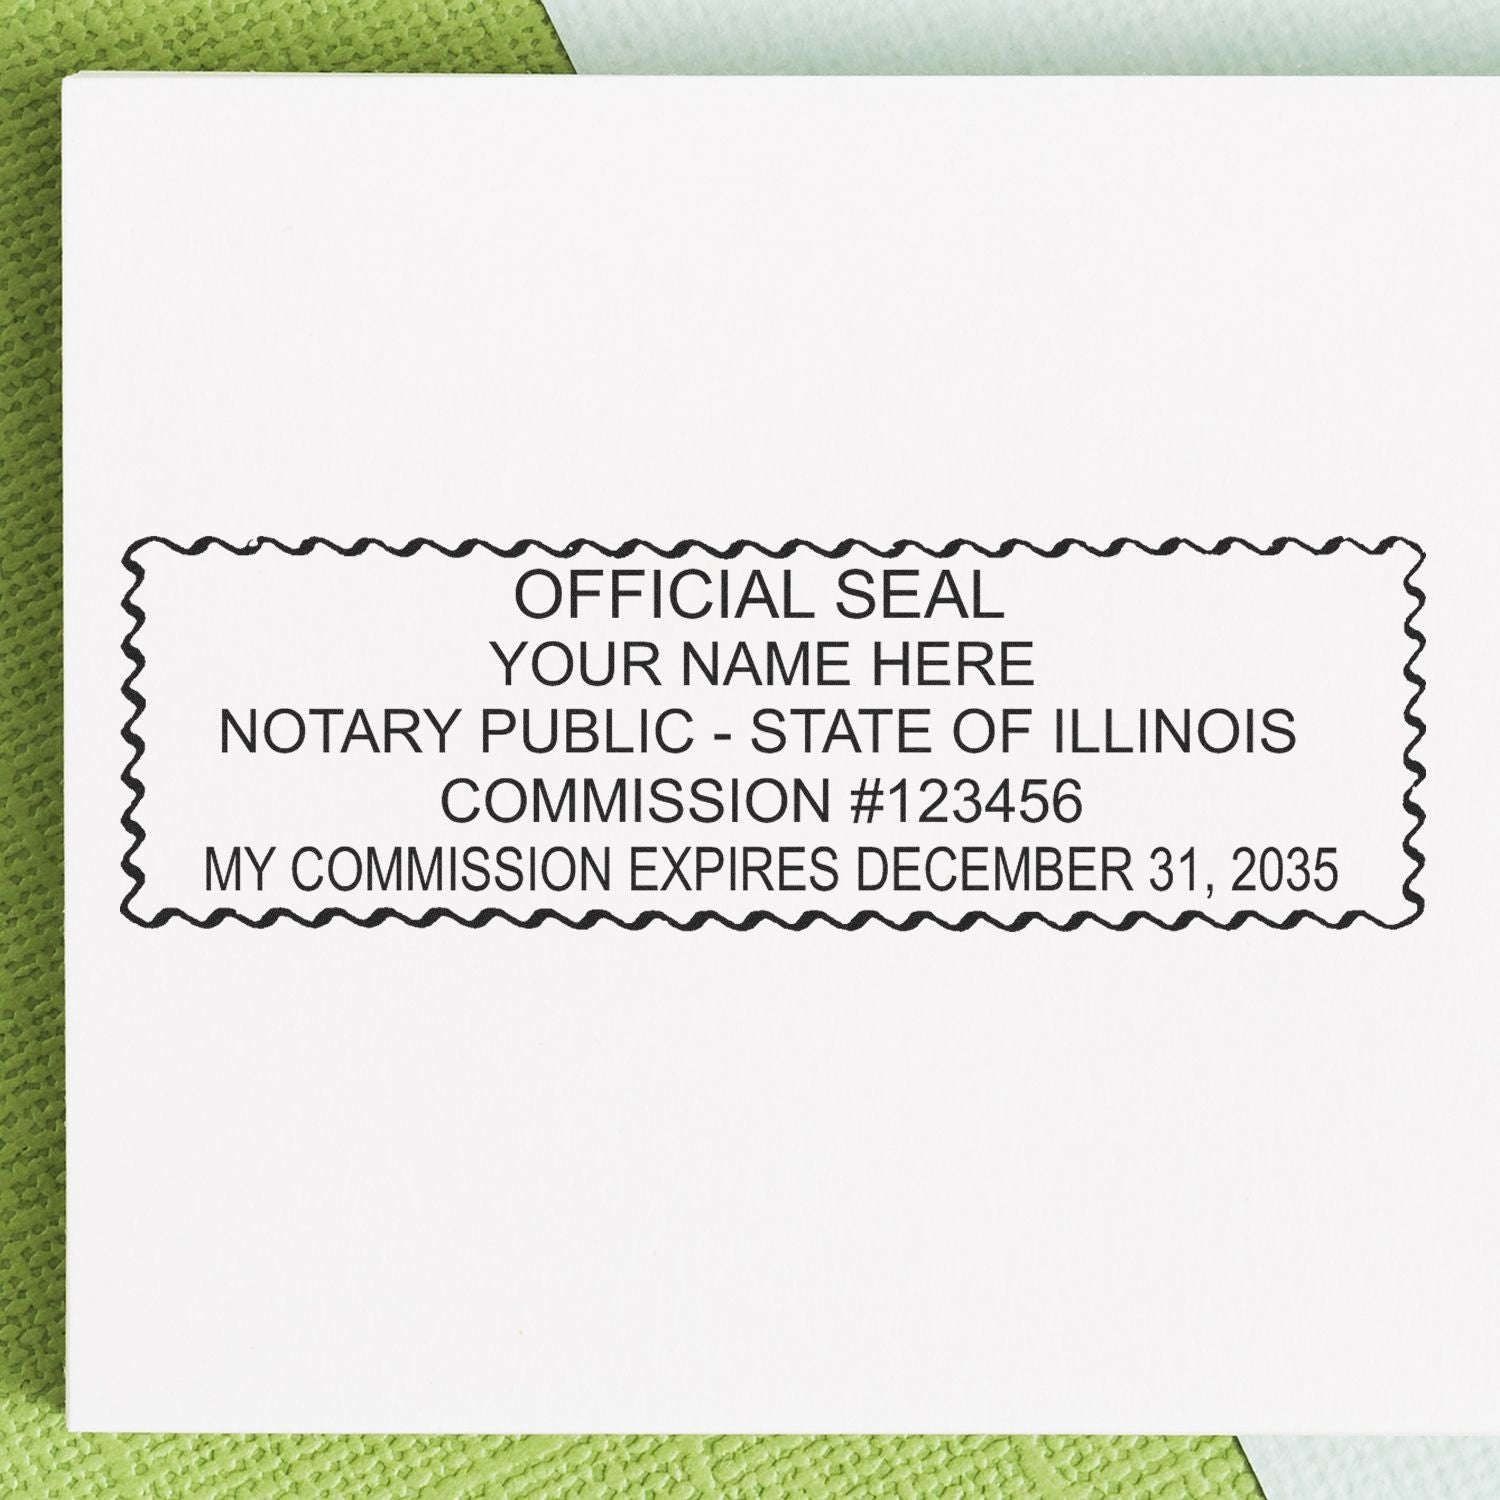 A lifestyle photo showing a stamped image of the Wooden Handle Illinois Rectangular Notary Public Stamp on a piece of paper